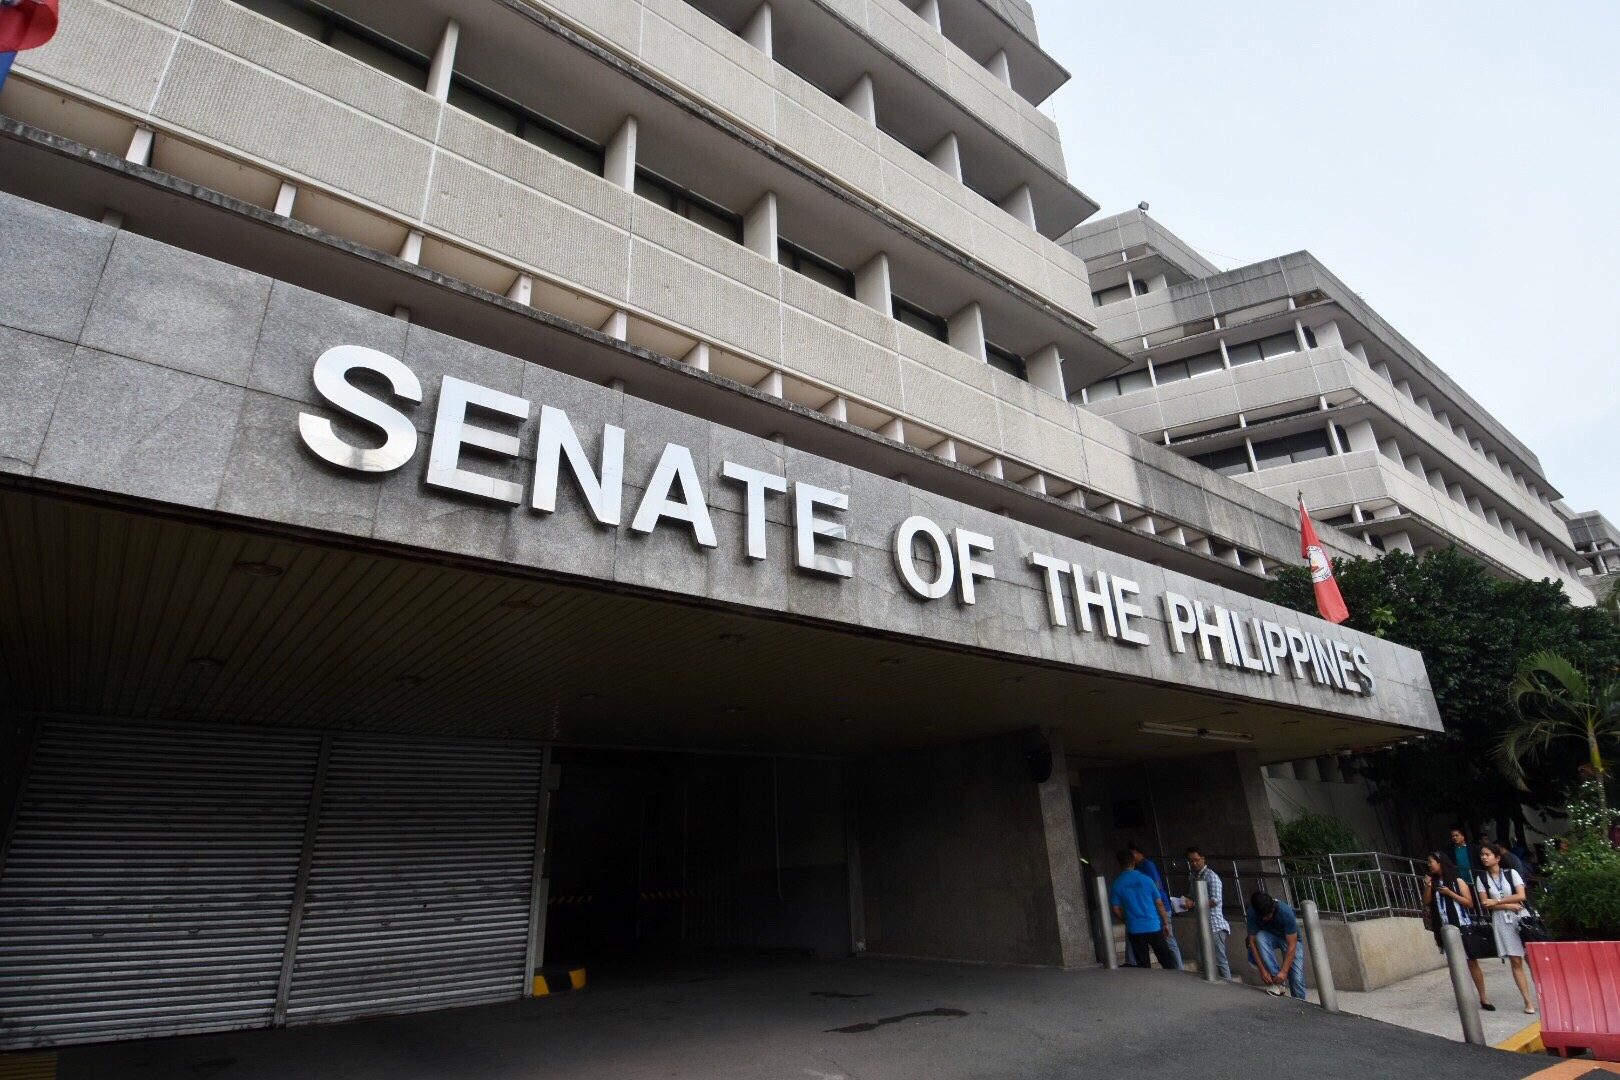 Senate, House suspend work for April 23 after Luzon earthquake